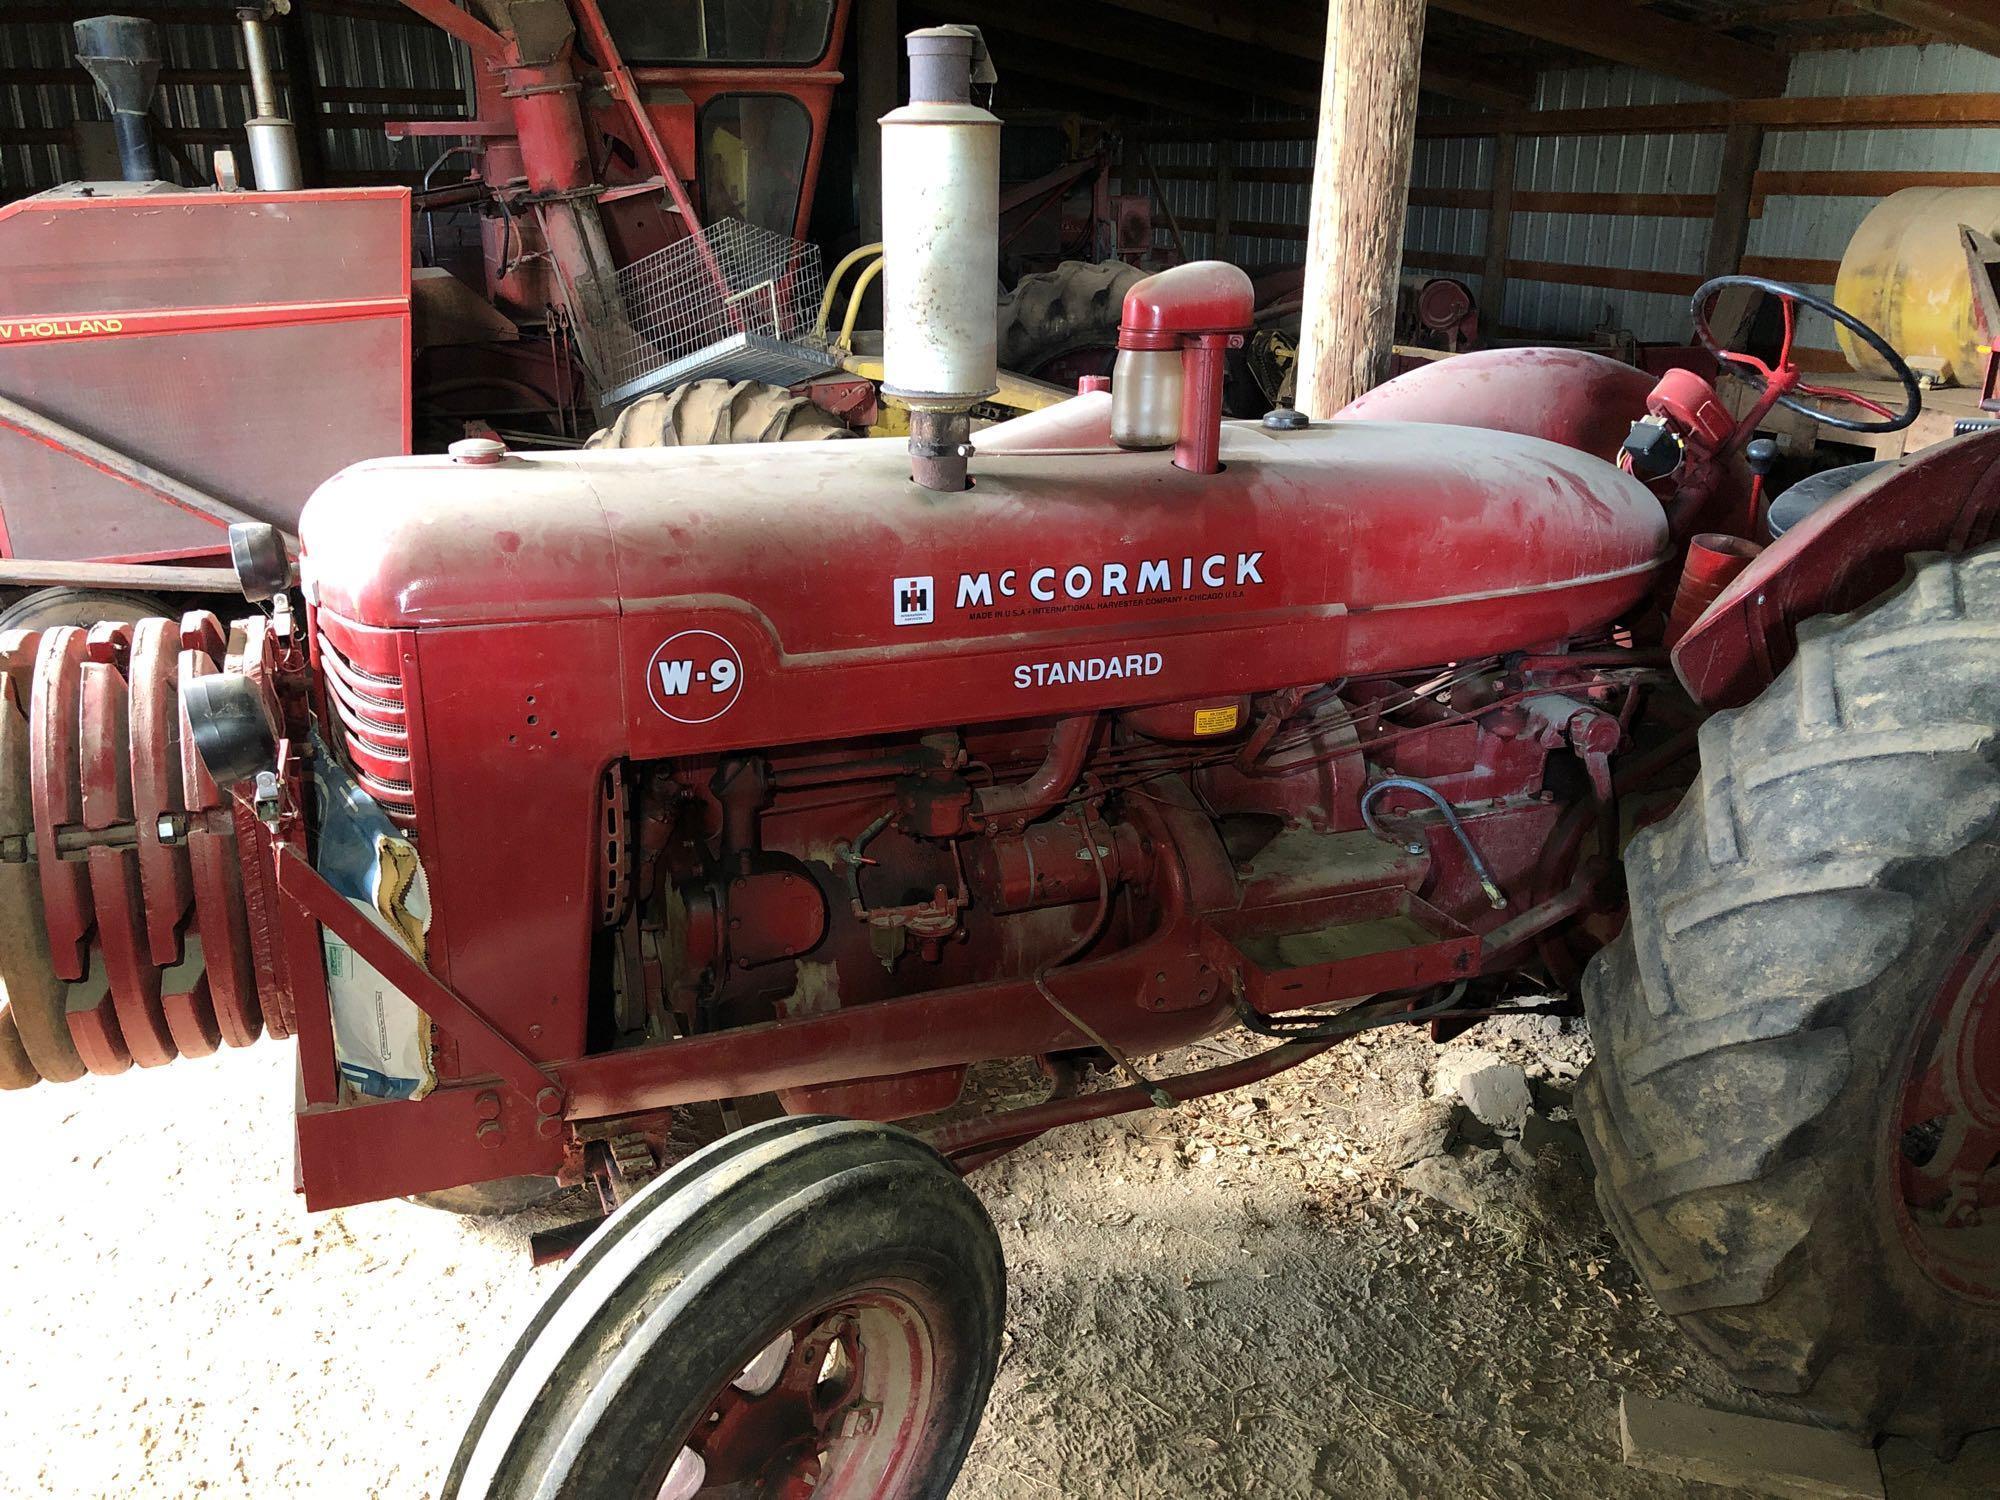 Farmall W-9 Standard Wide Front Tractor with Backhoe Attachment, Weights